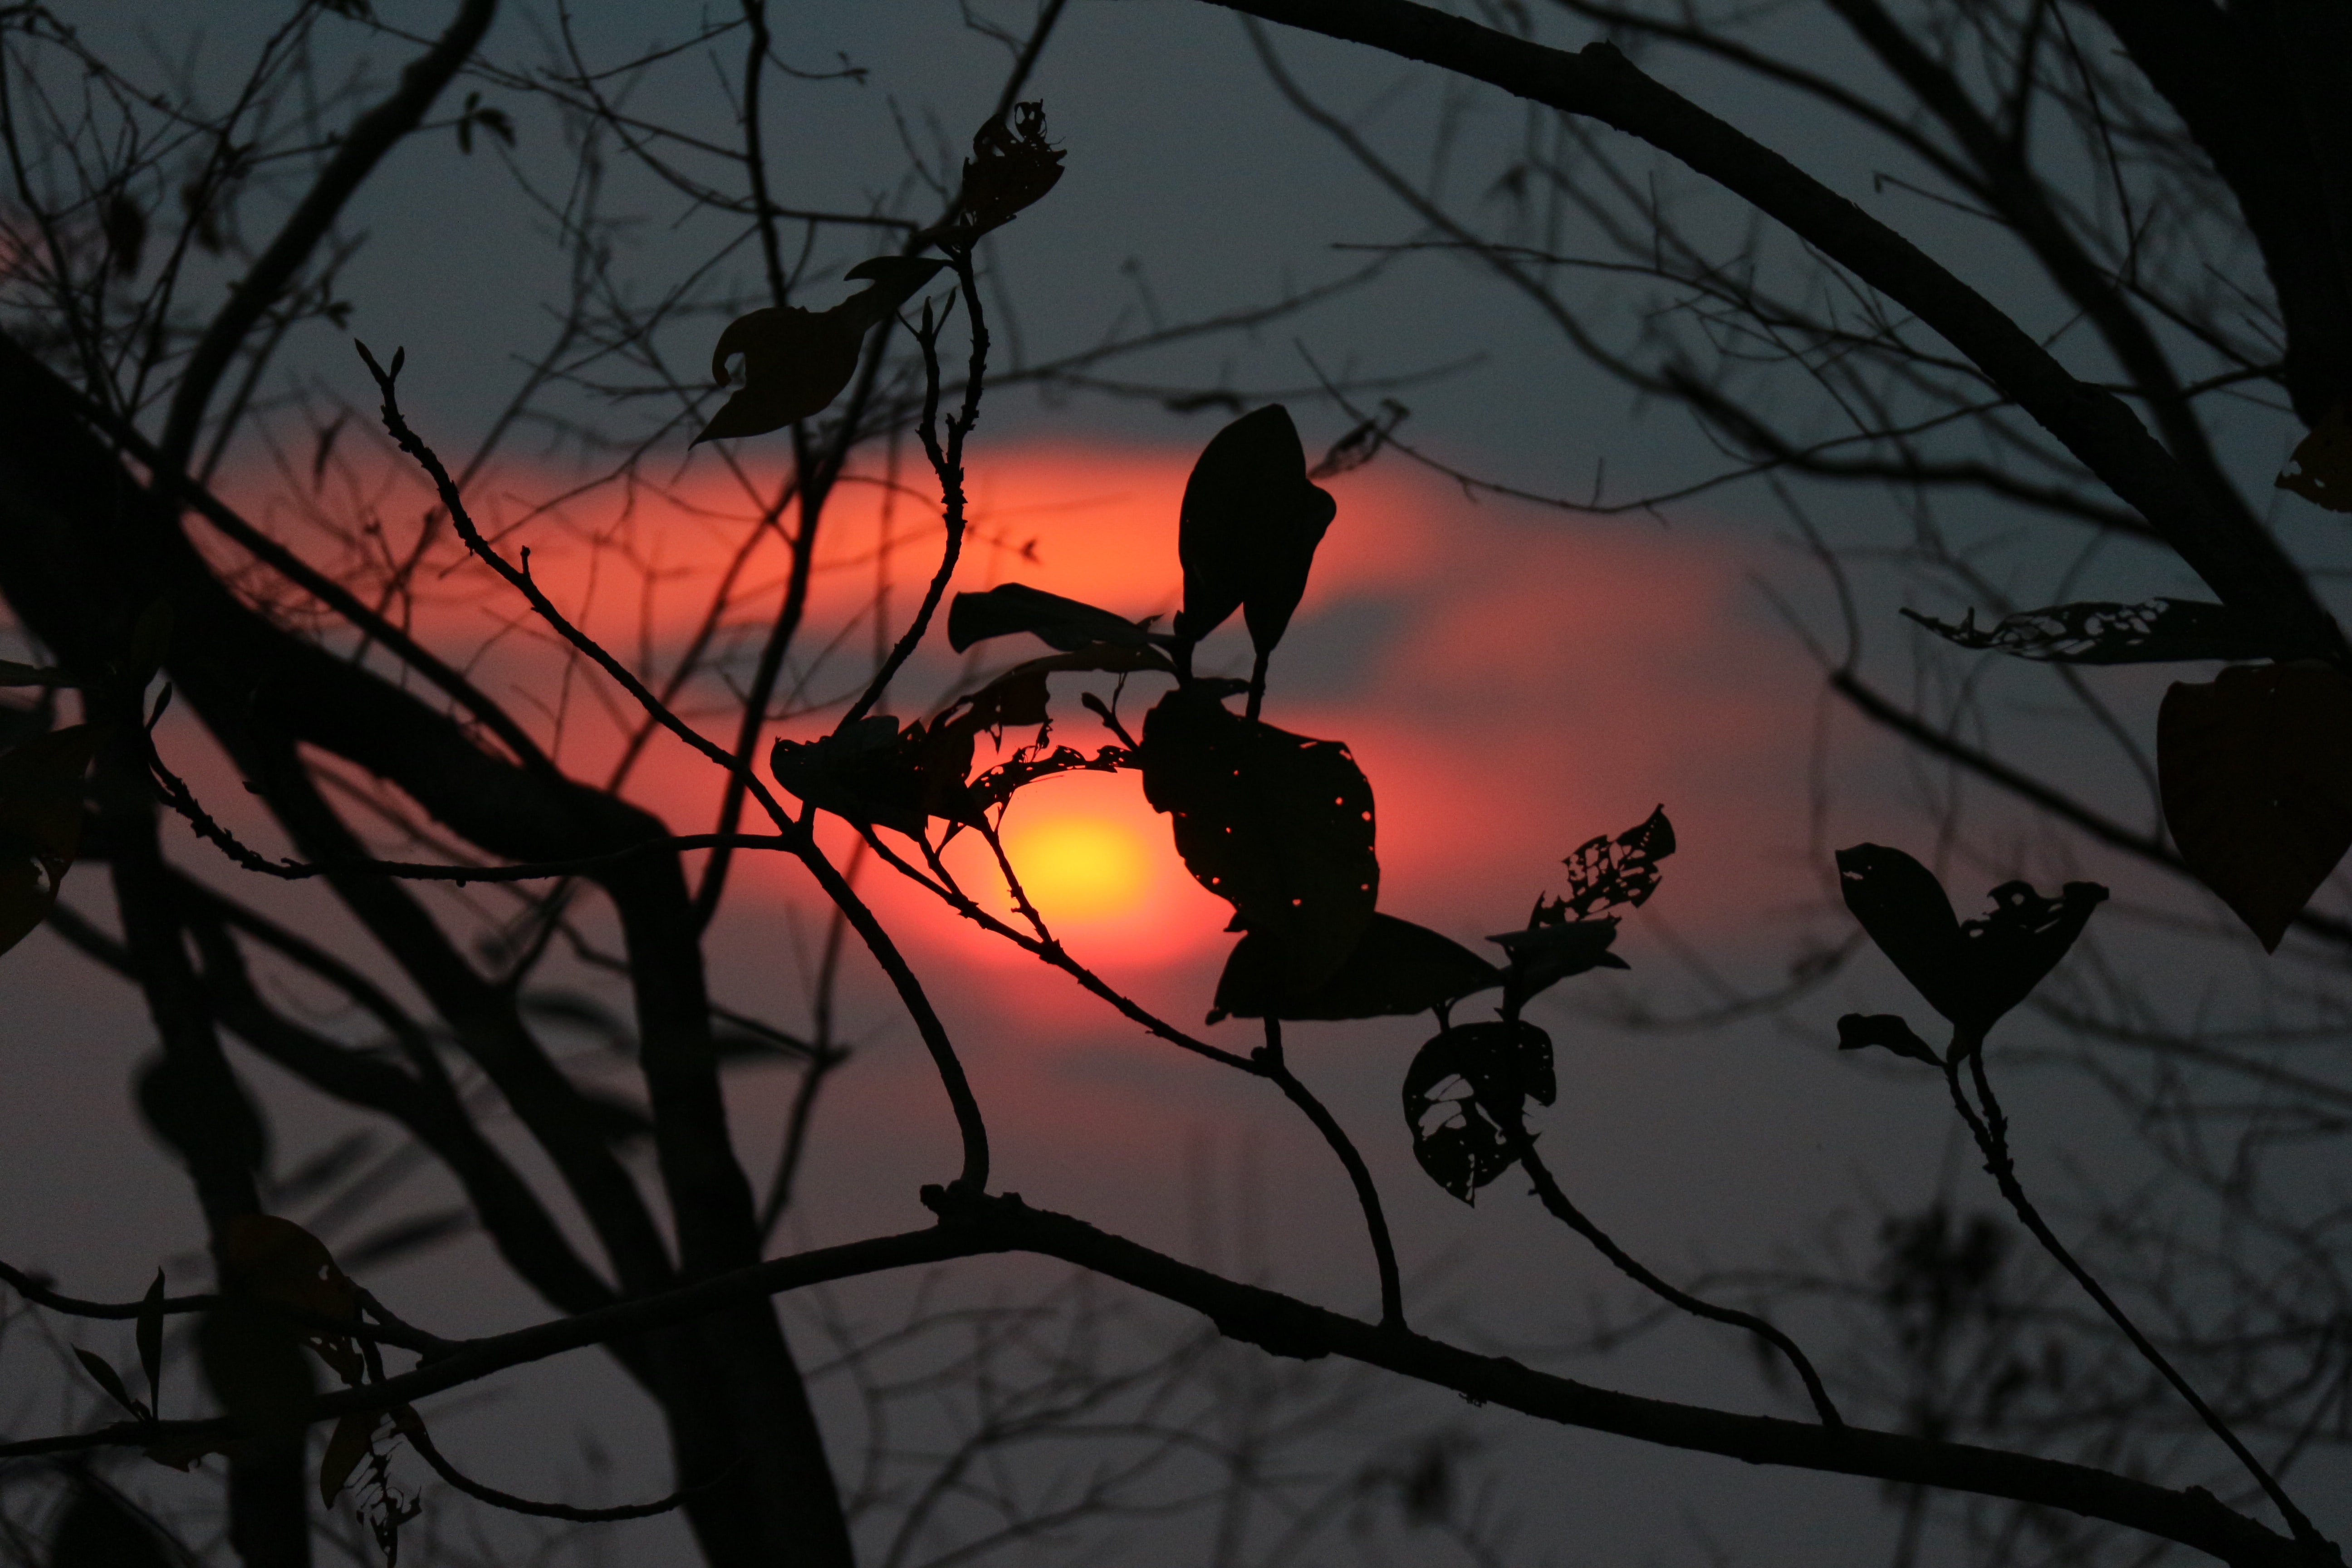 The red light of dawn viewed through leaves and branches.